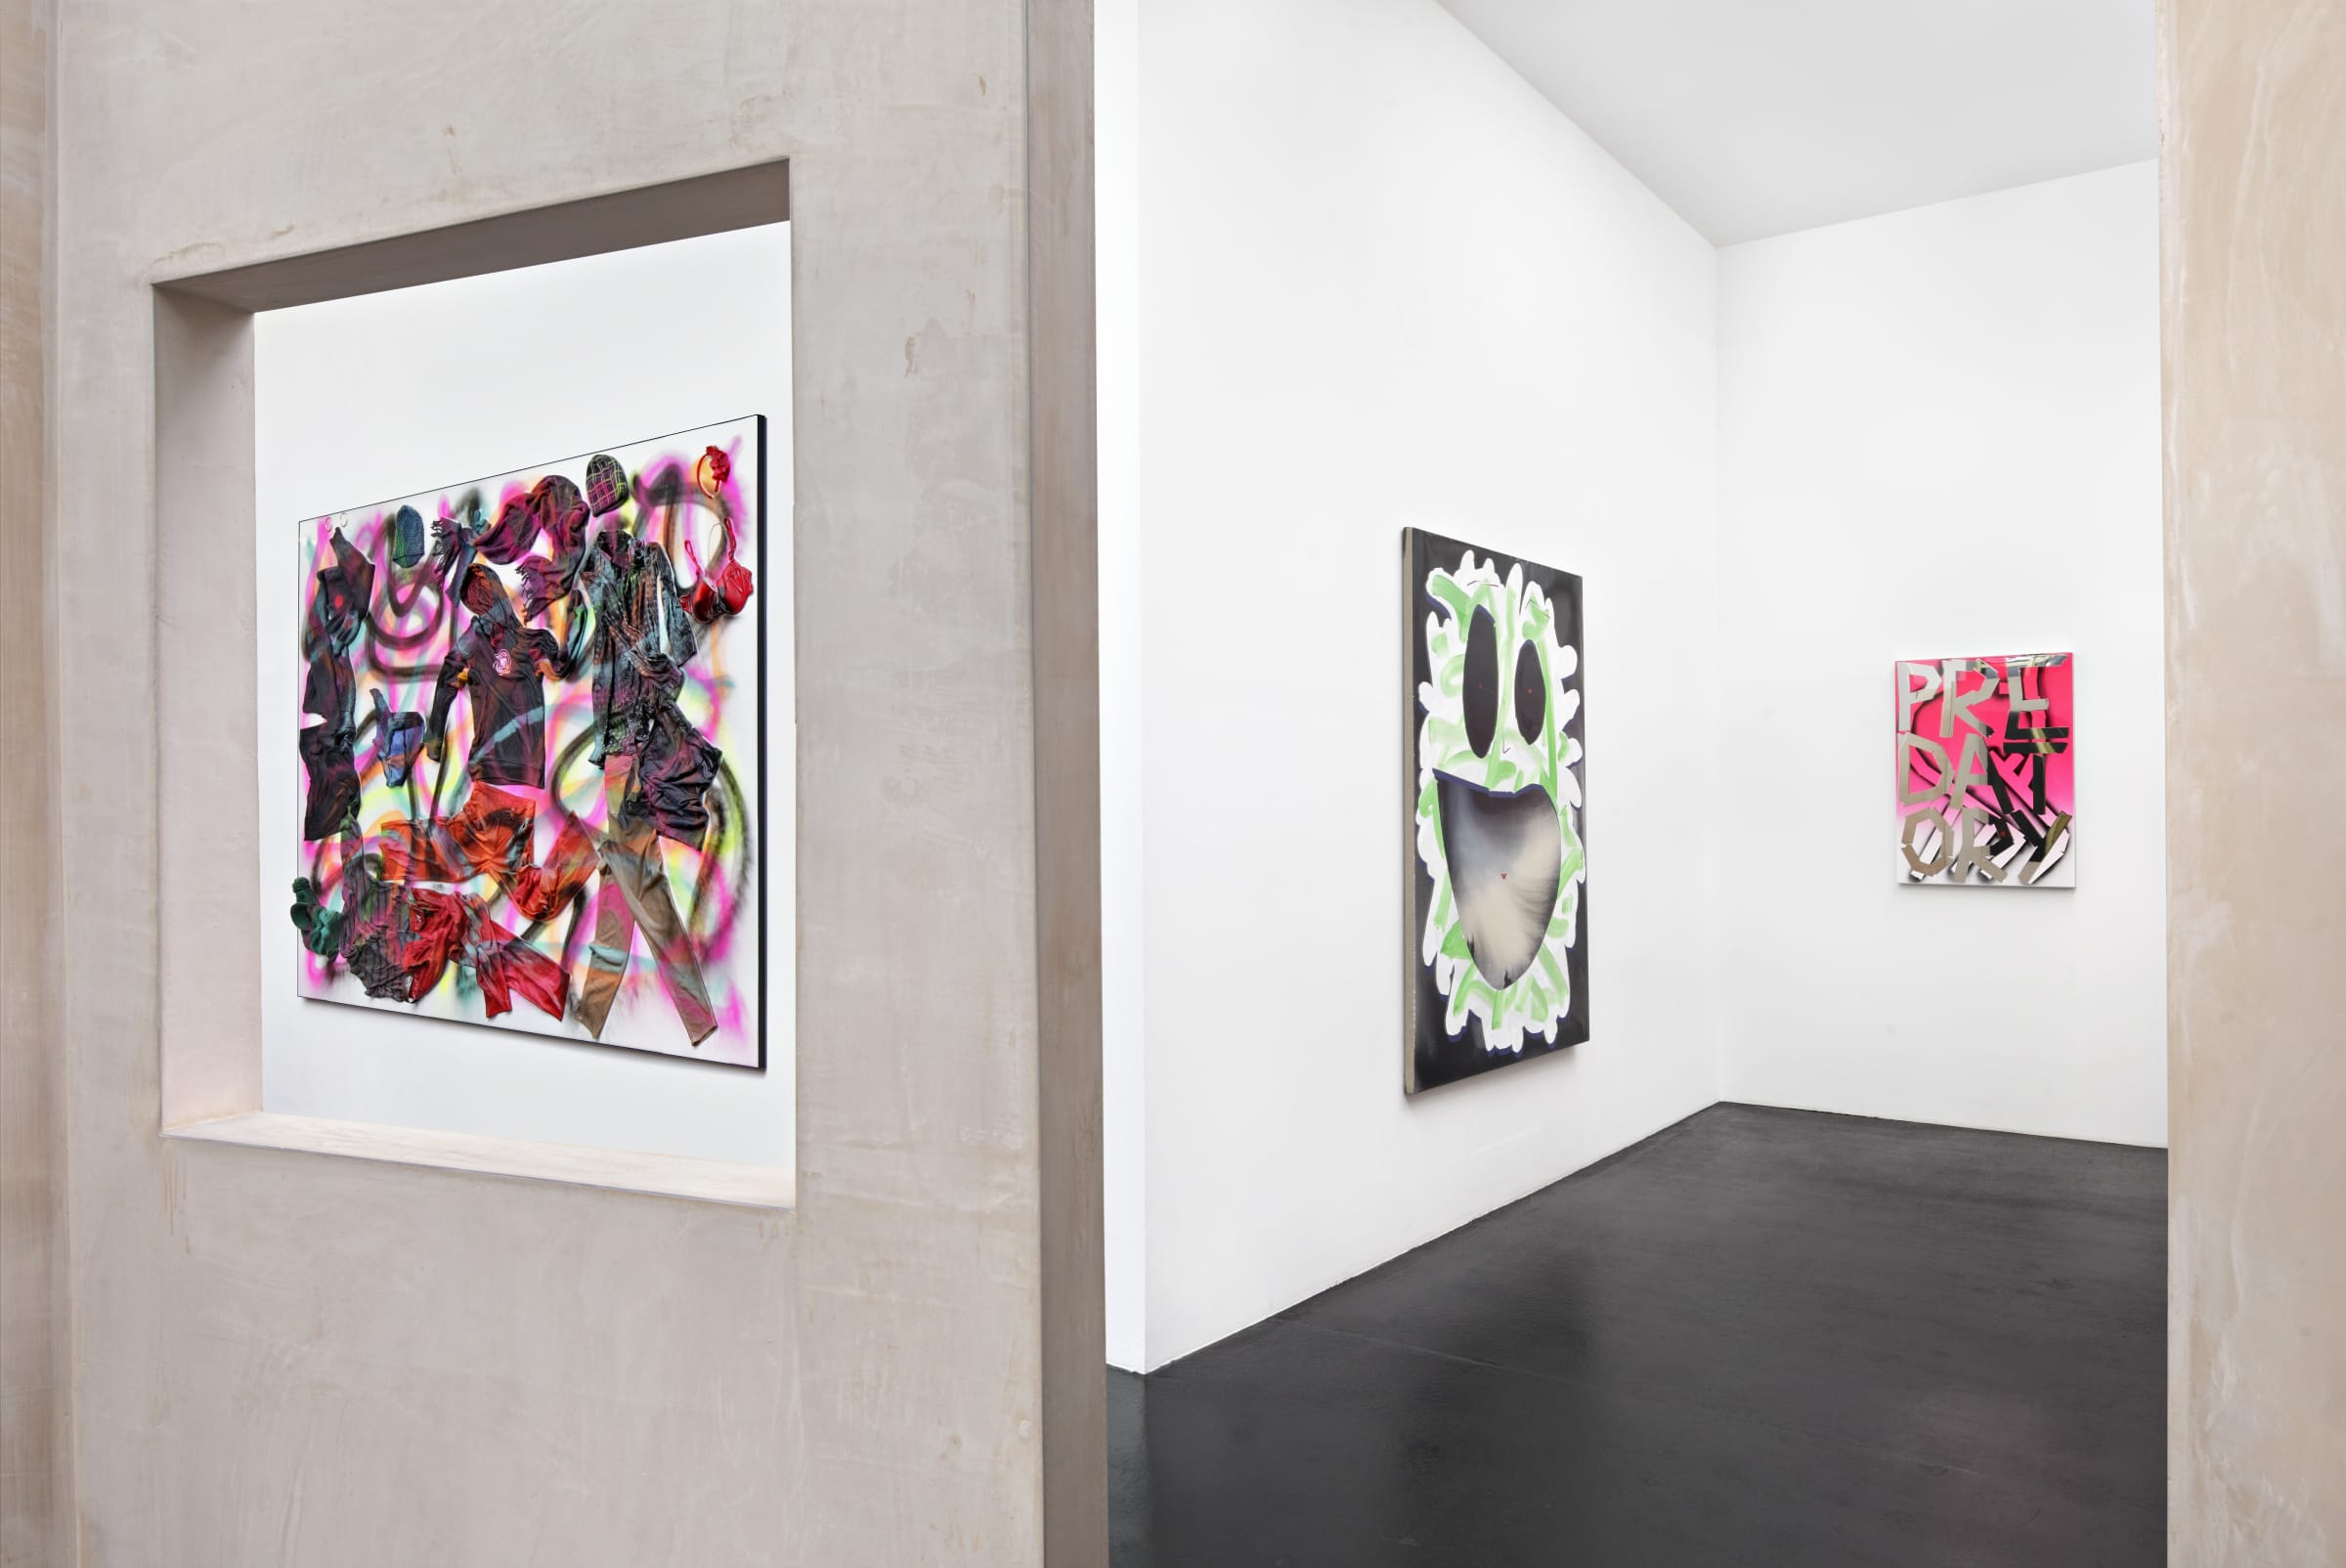 Eddie Peake Penetrates The Body, Nullifies The Senses Installation View January 18 – February 22, 2014 Peres Projects, Berlin